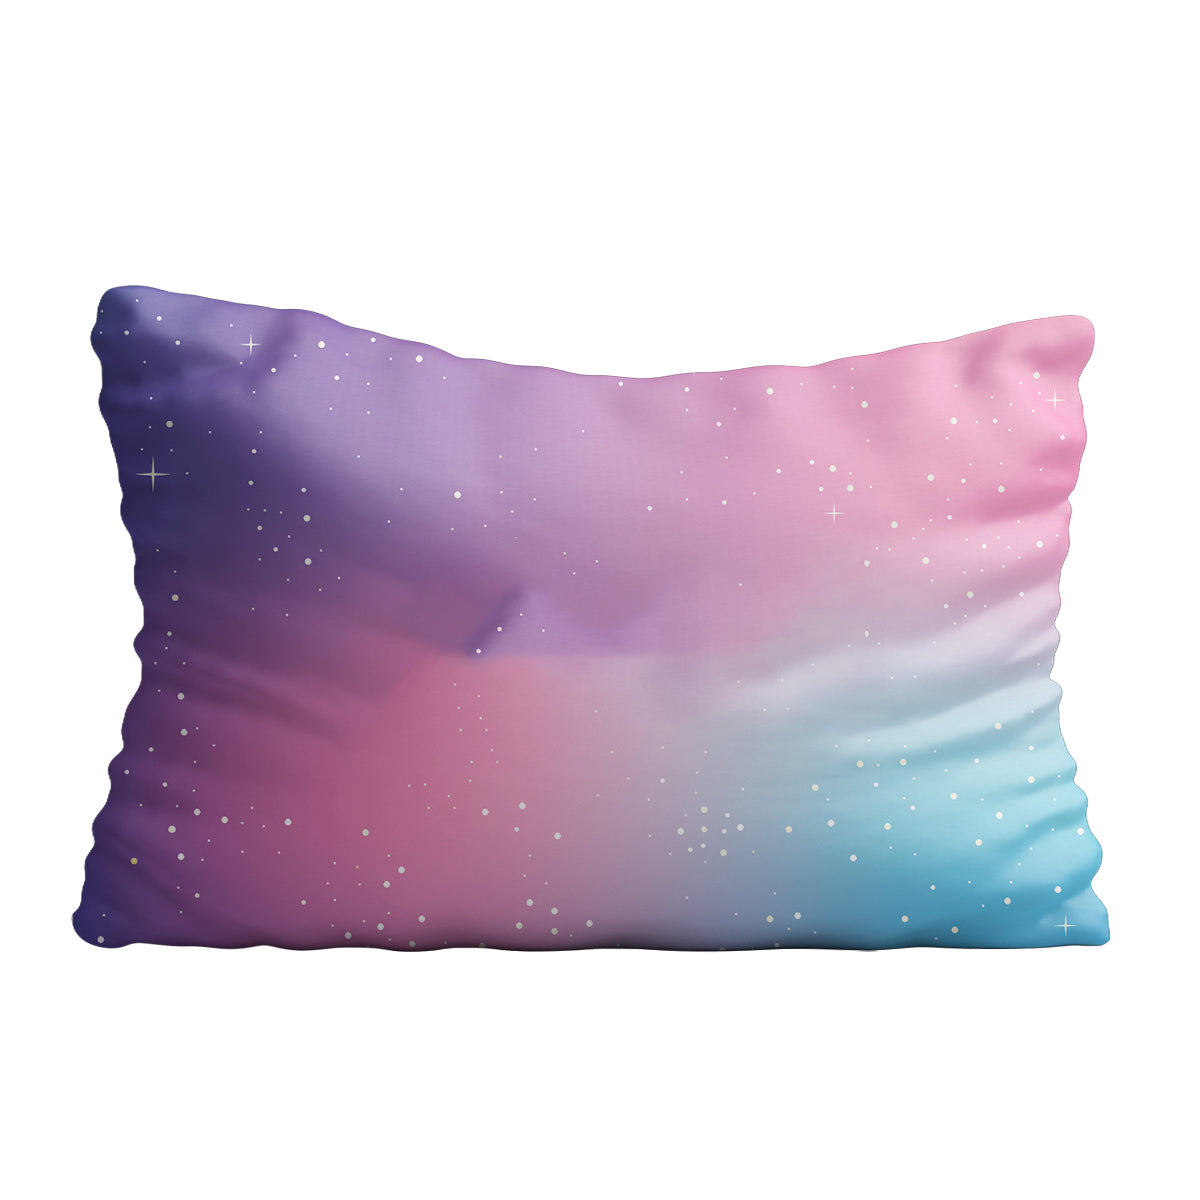 Universe name purple and pink degrade pillow case - Wimziy&Co.